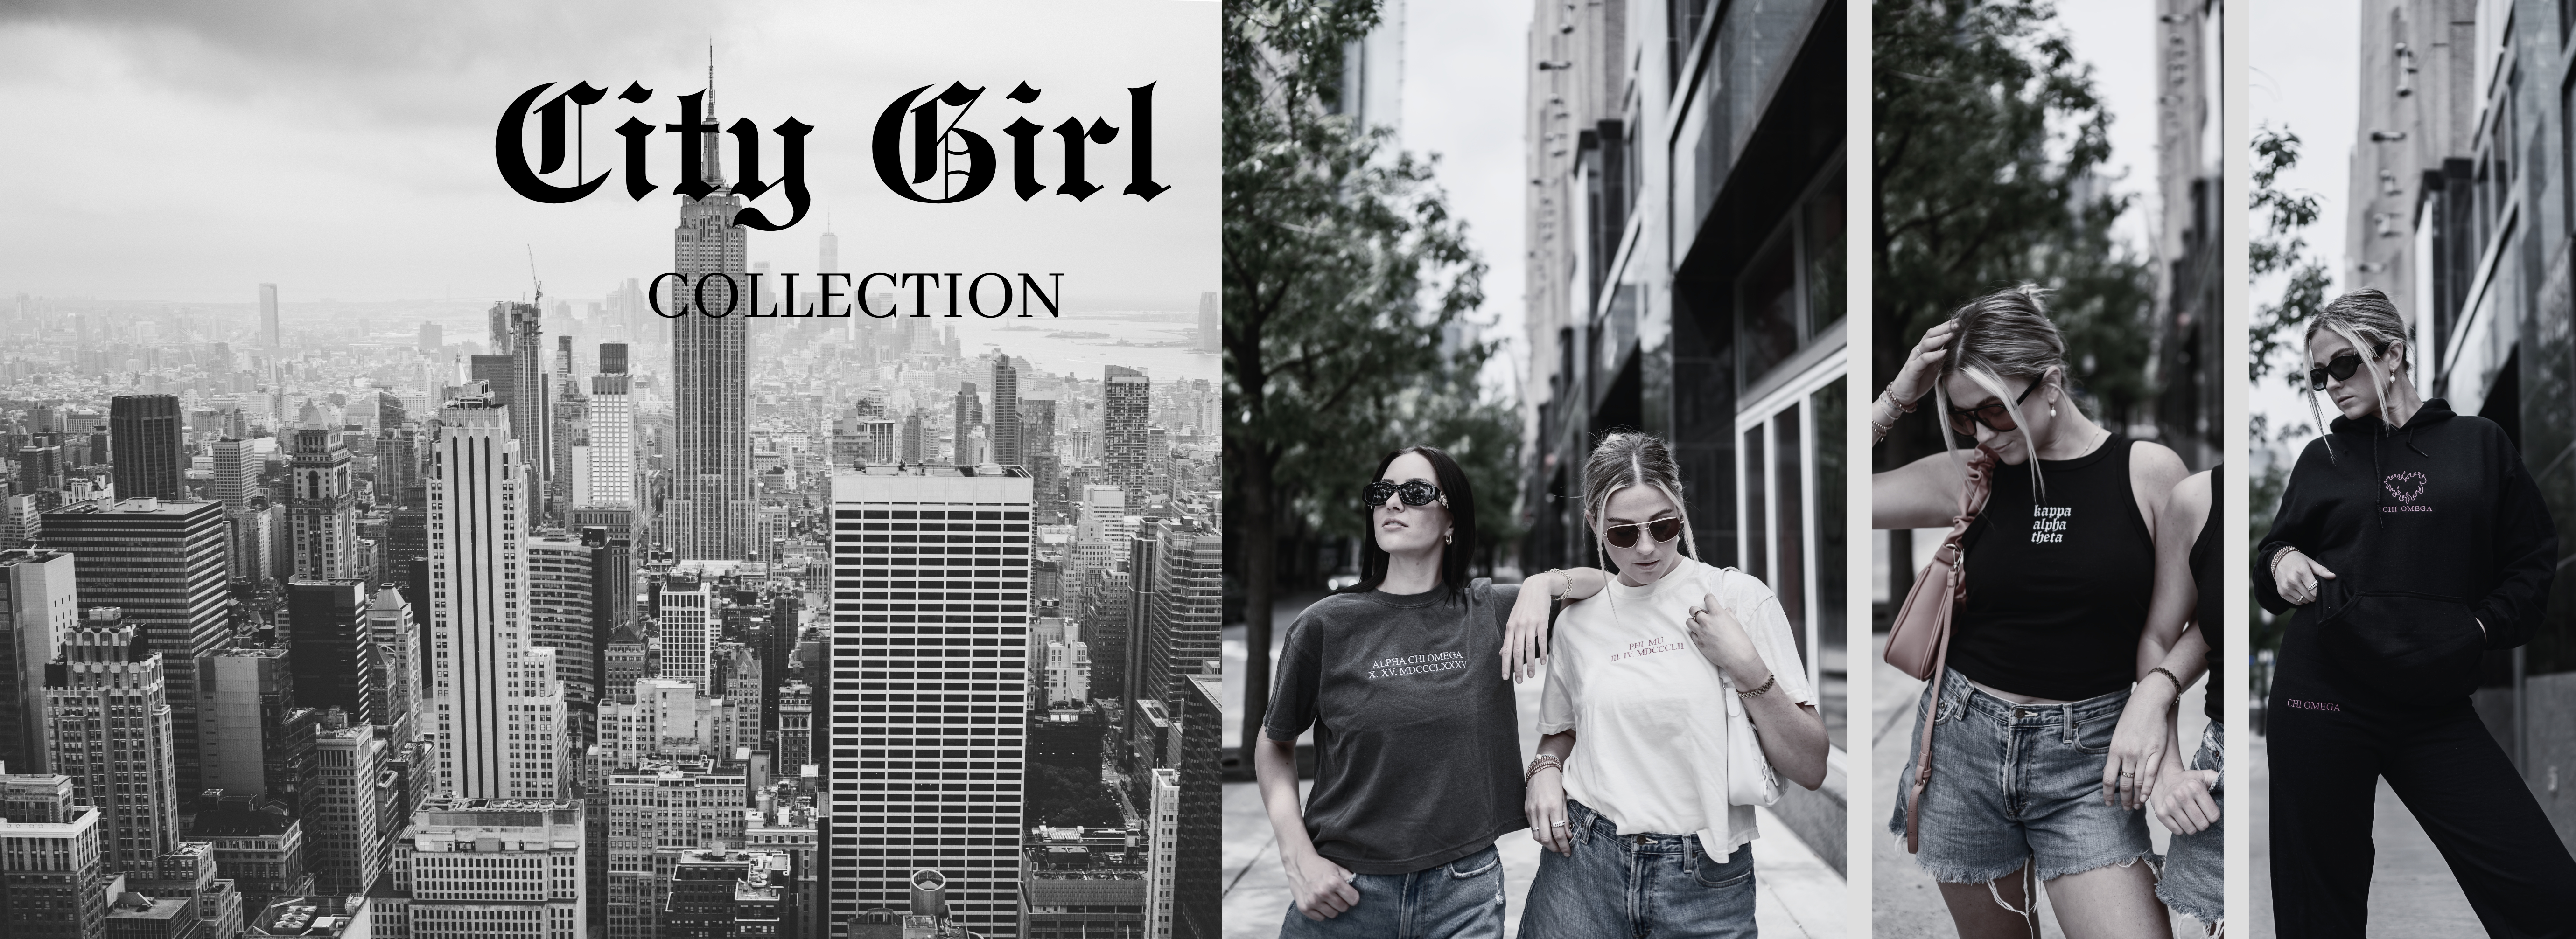 City Girl Collection